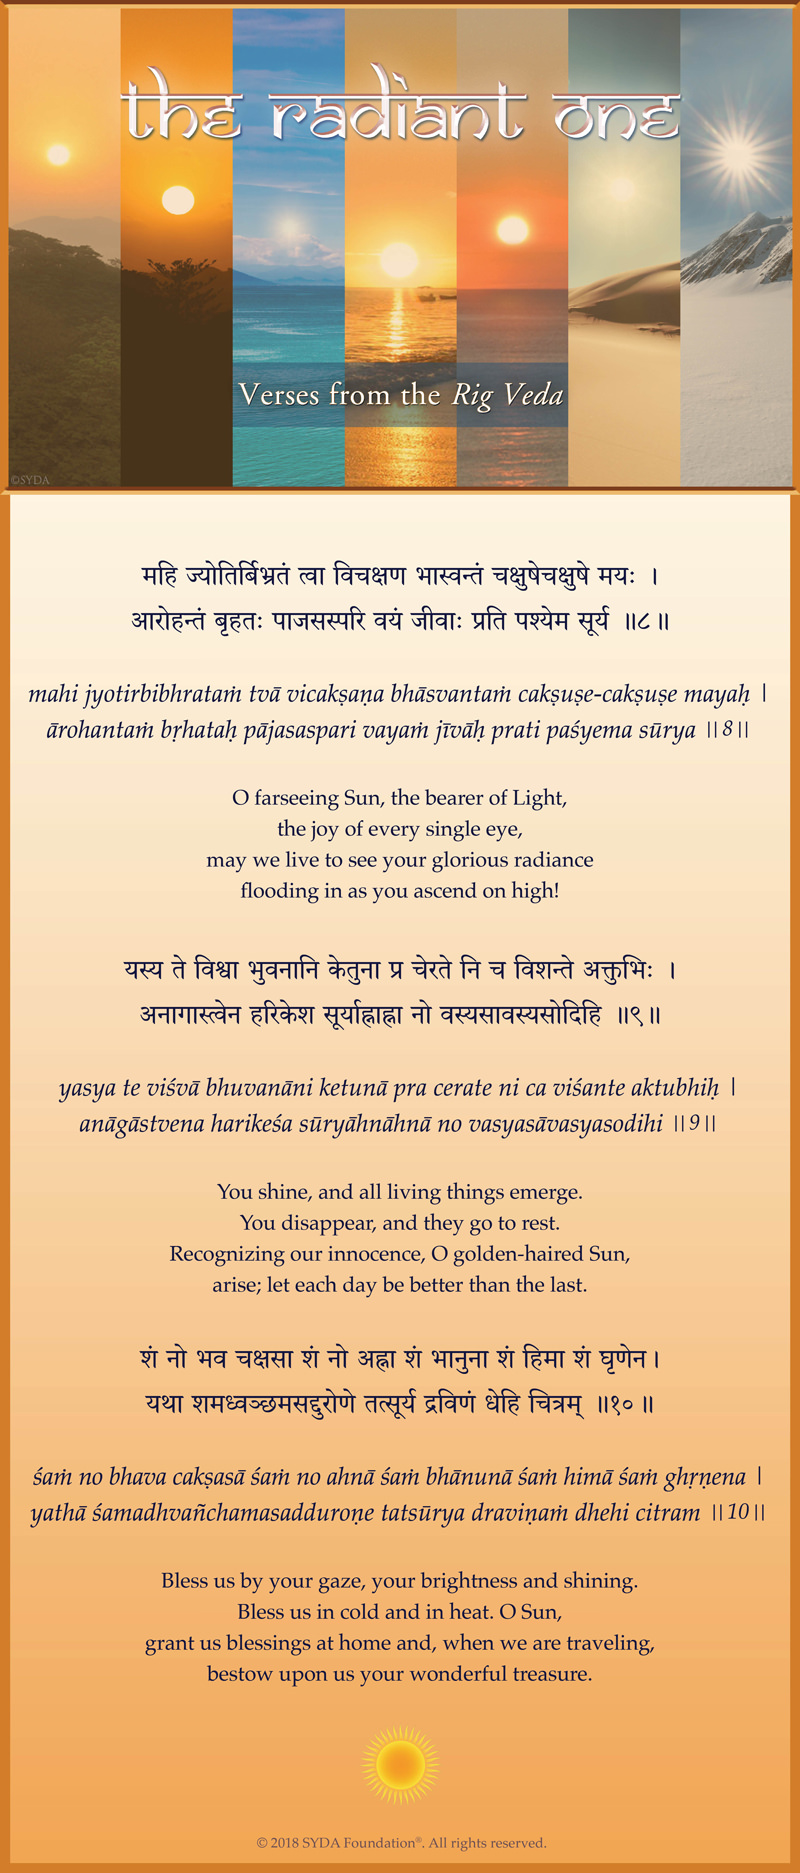 A Vedic Prayer for Peace